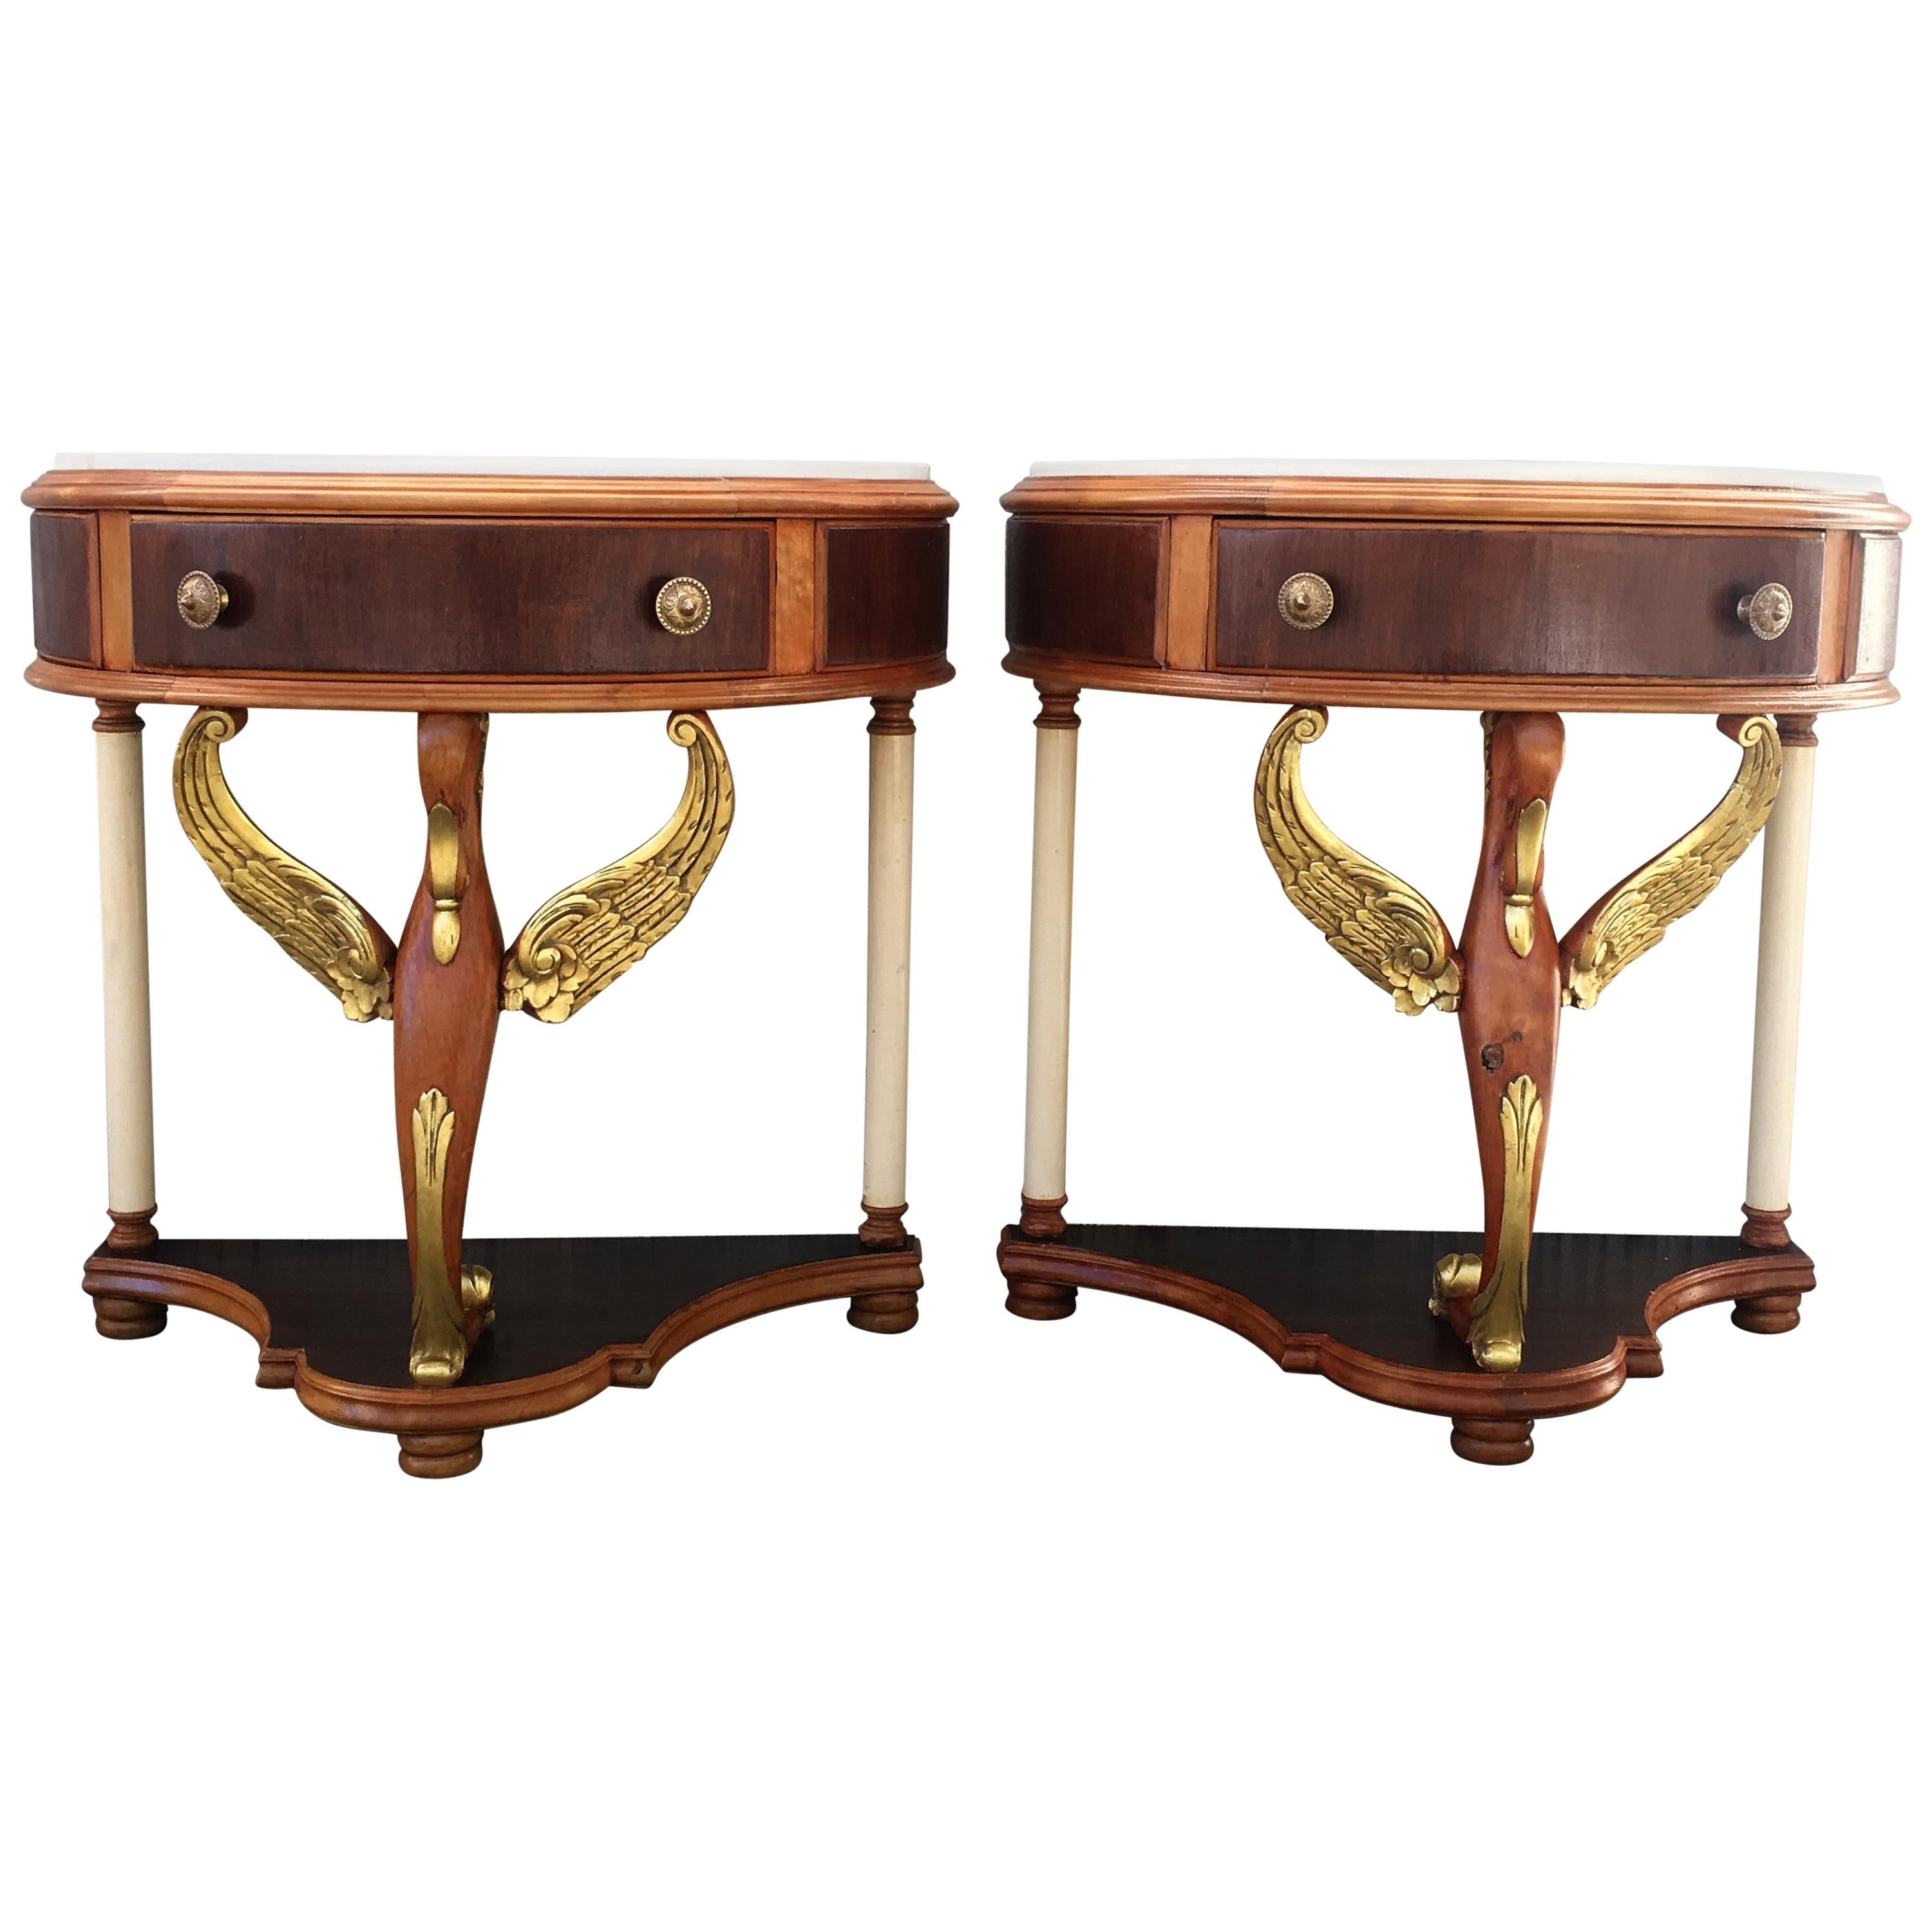 20th Century Pair of Demilune Swan Nightstands with White Marble Top